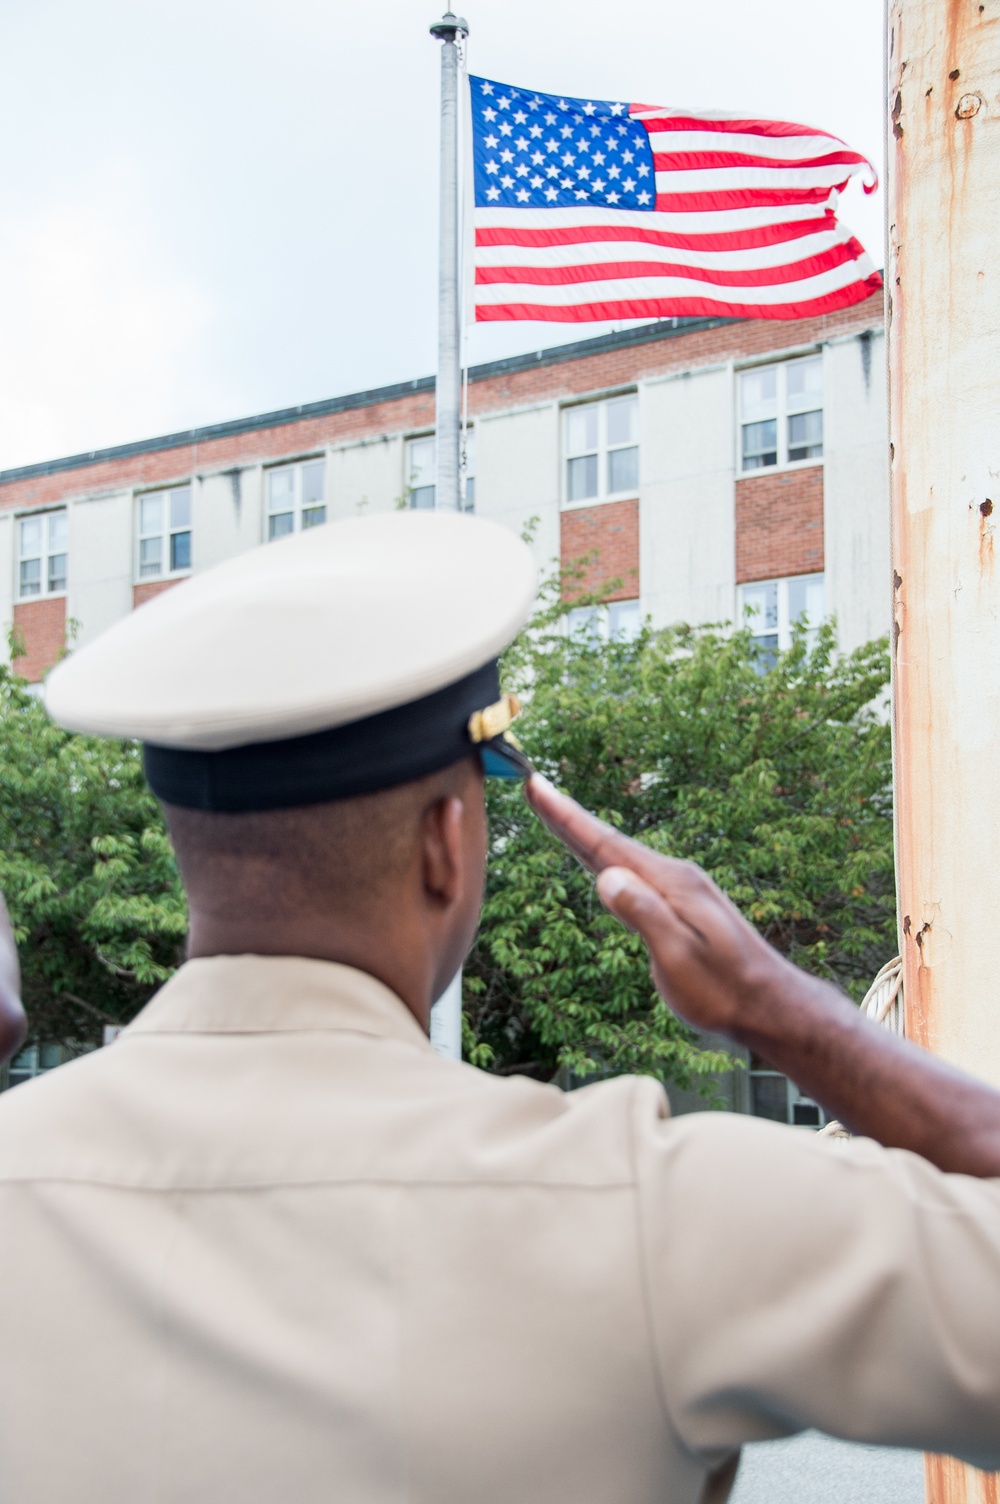 190911-N-TE695-0015 NEWPORT, R.I. (Aug. 8, 2019) – Director of Officer Development School salutes the colors